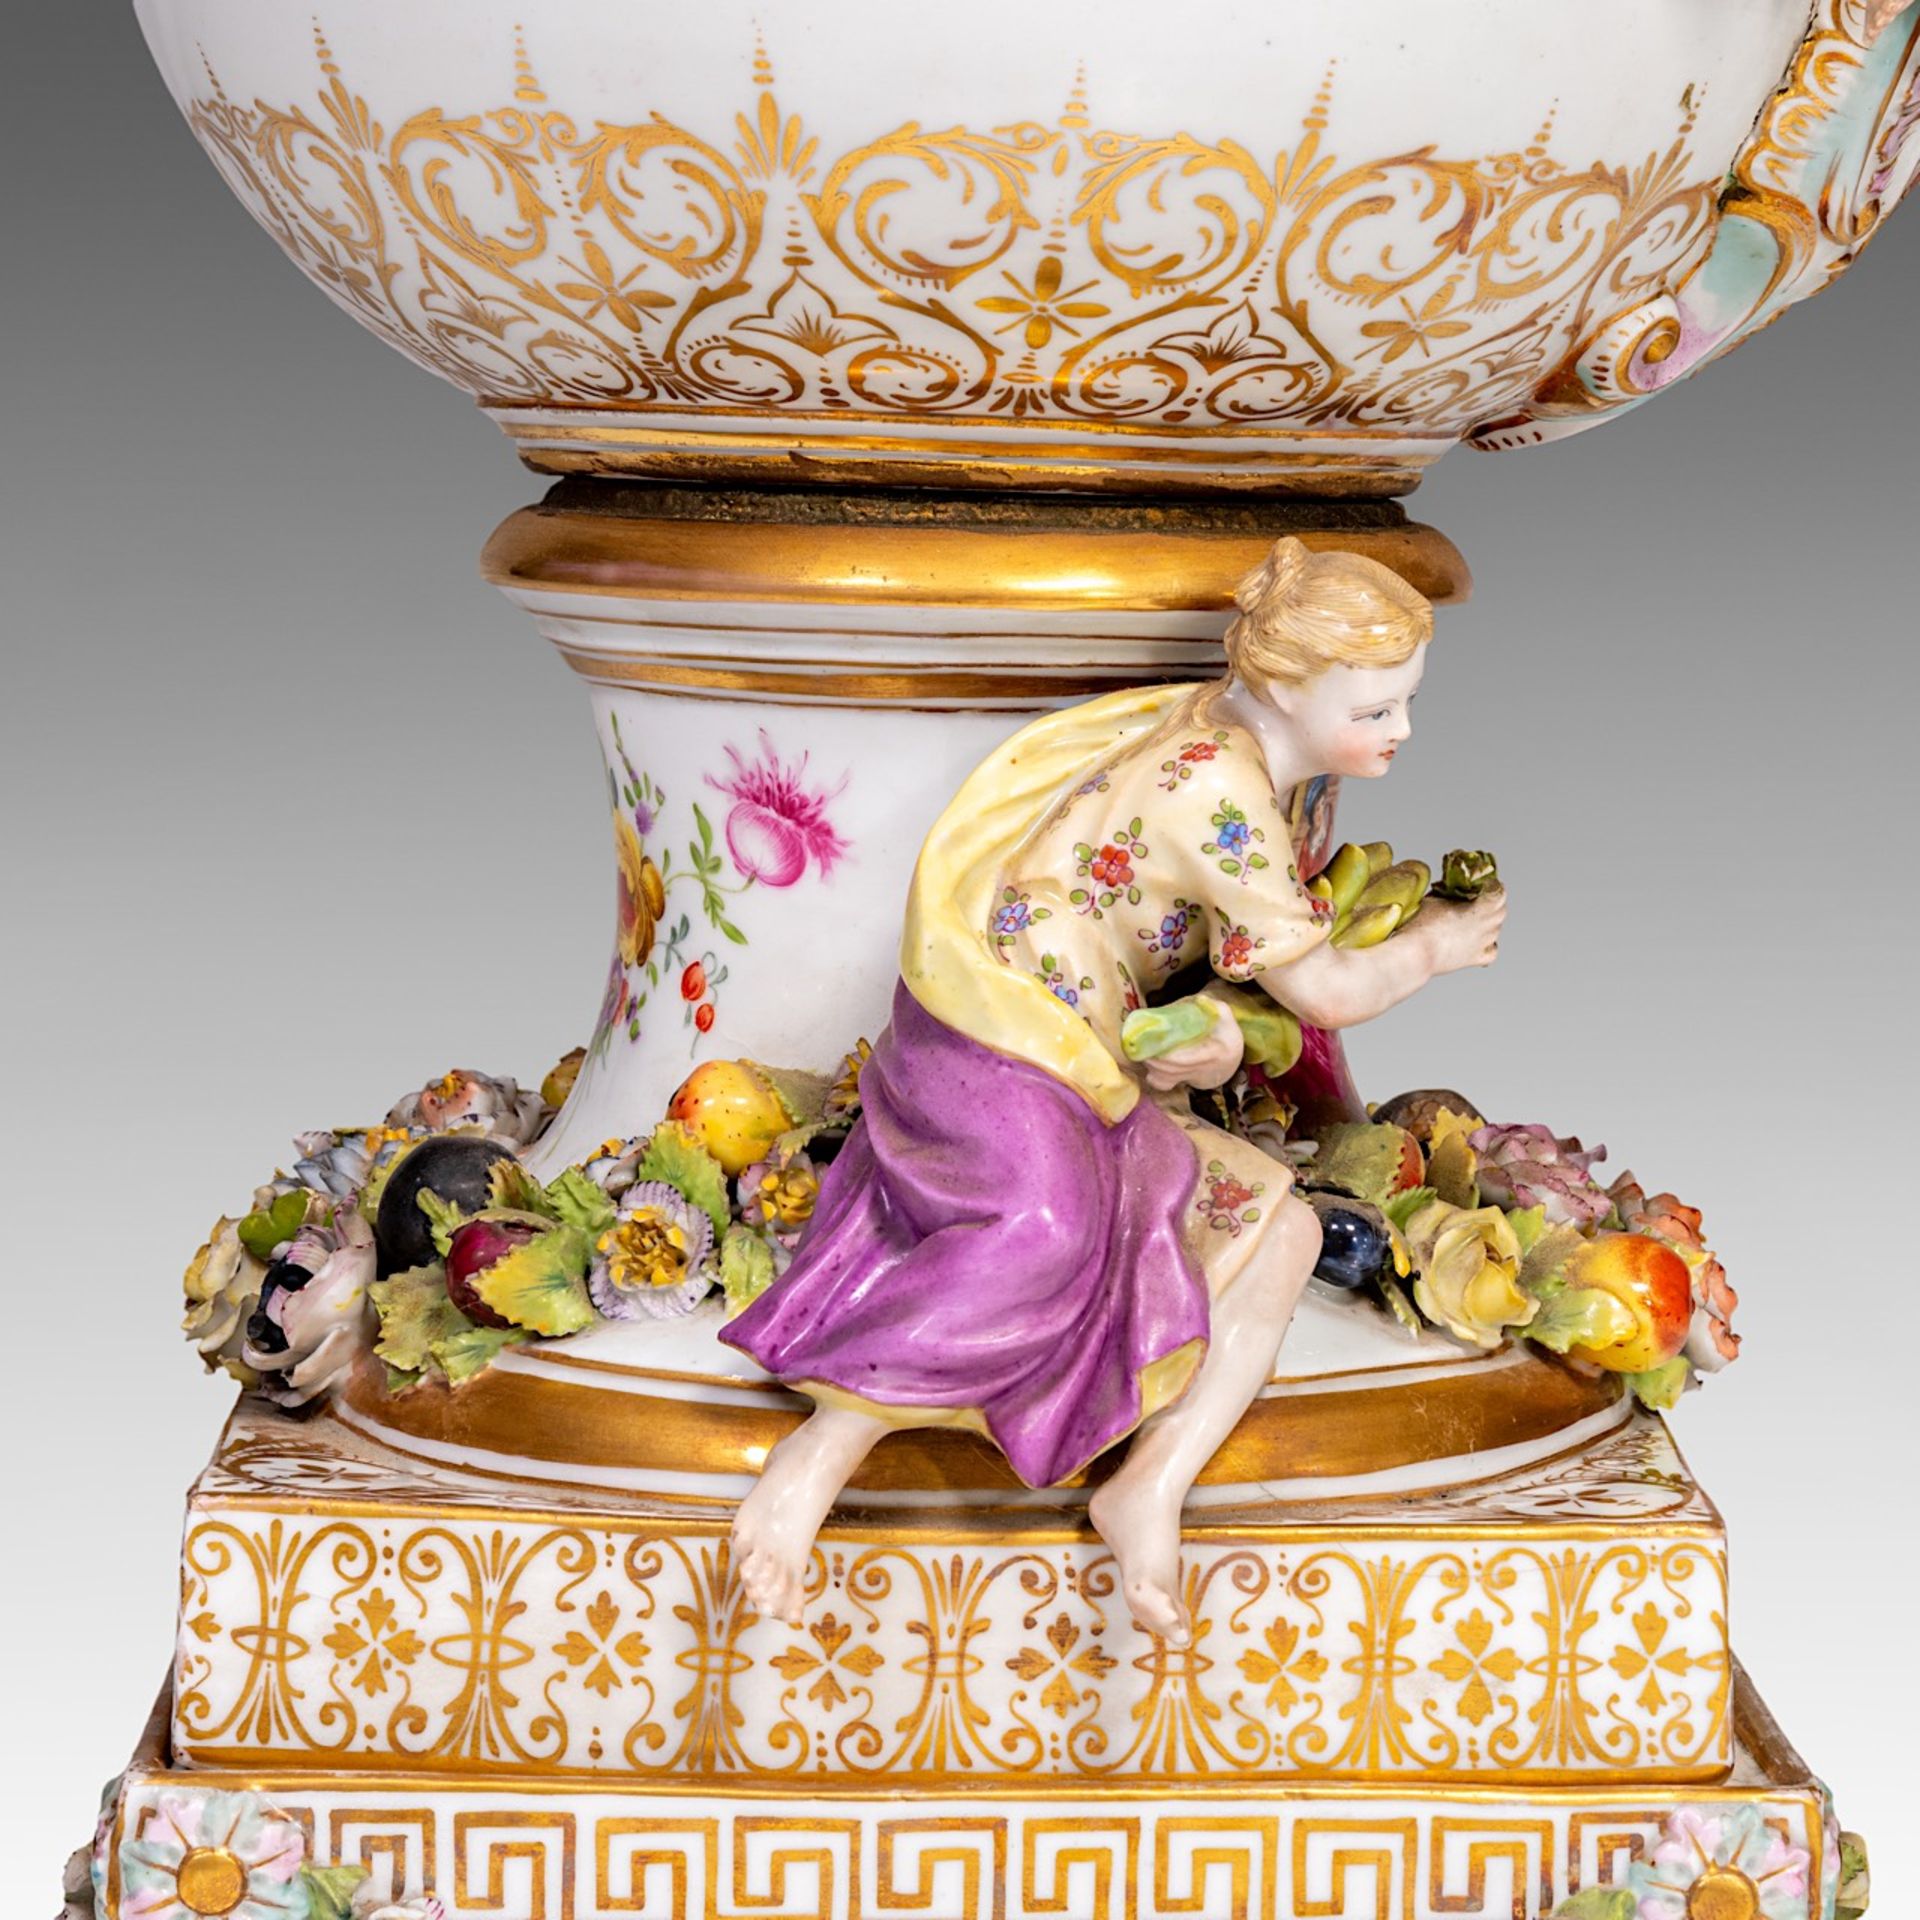 A very imposing Saxony porcelain vase on stand, Postschappel manufactory, Dresden, H 107 cm (total) - Image 18 of 23